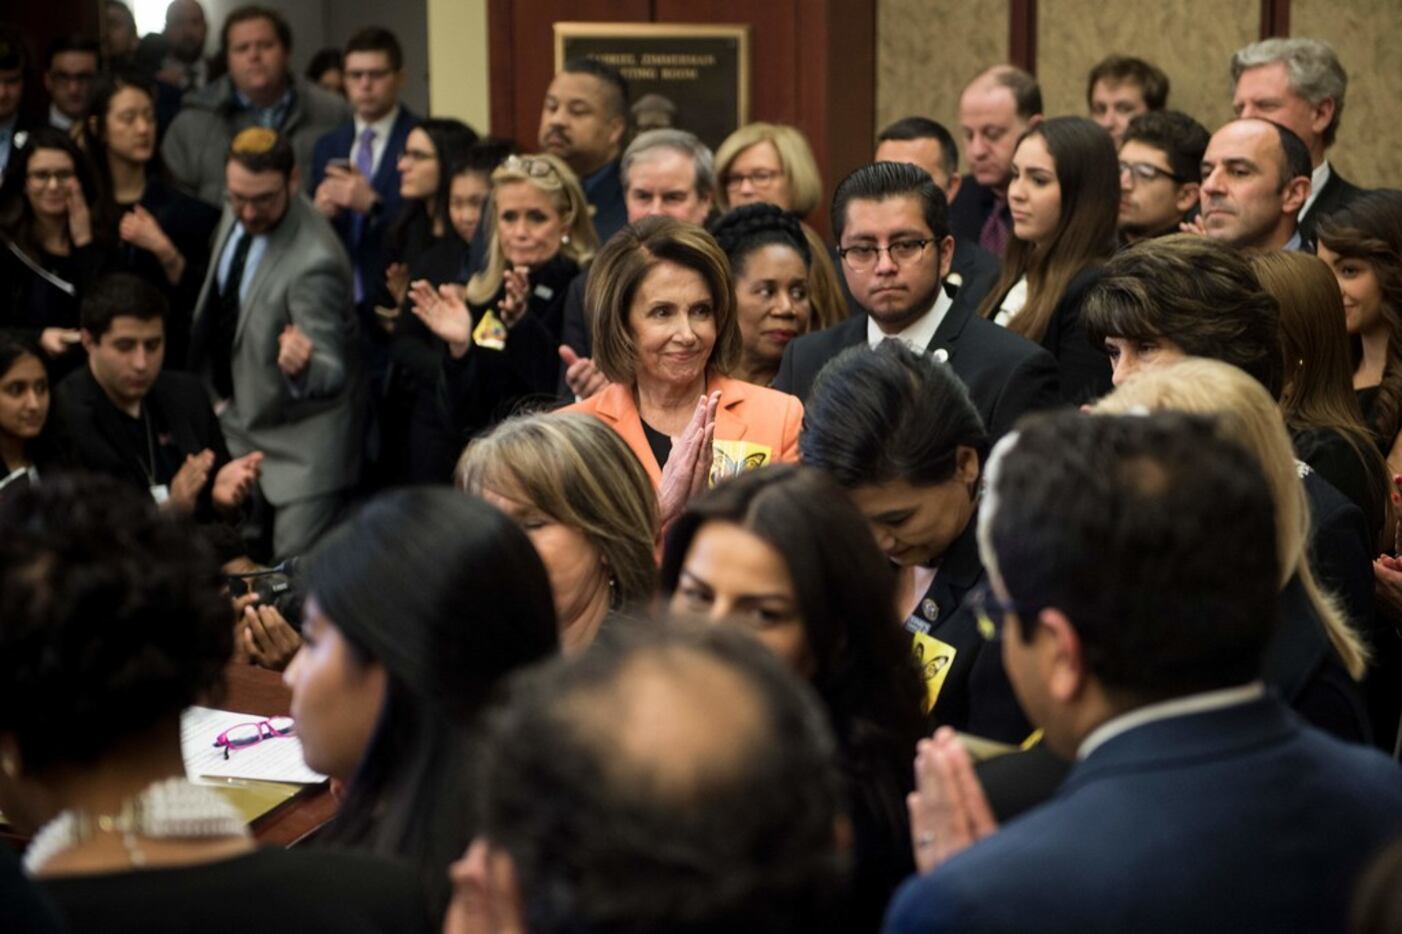 House Minority Leader Nancy Pelosi, D-Calif., clapped for Dreamers during a news conference...